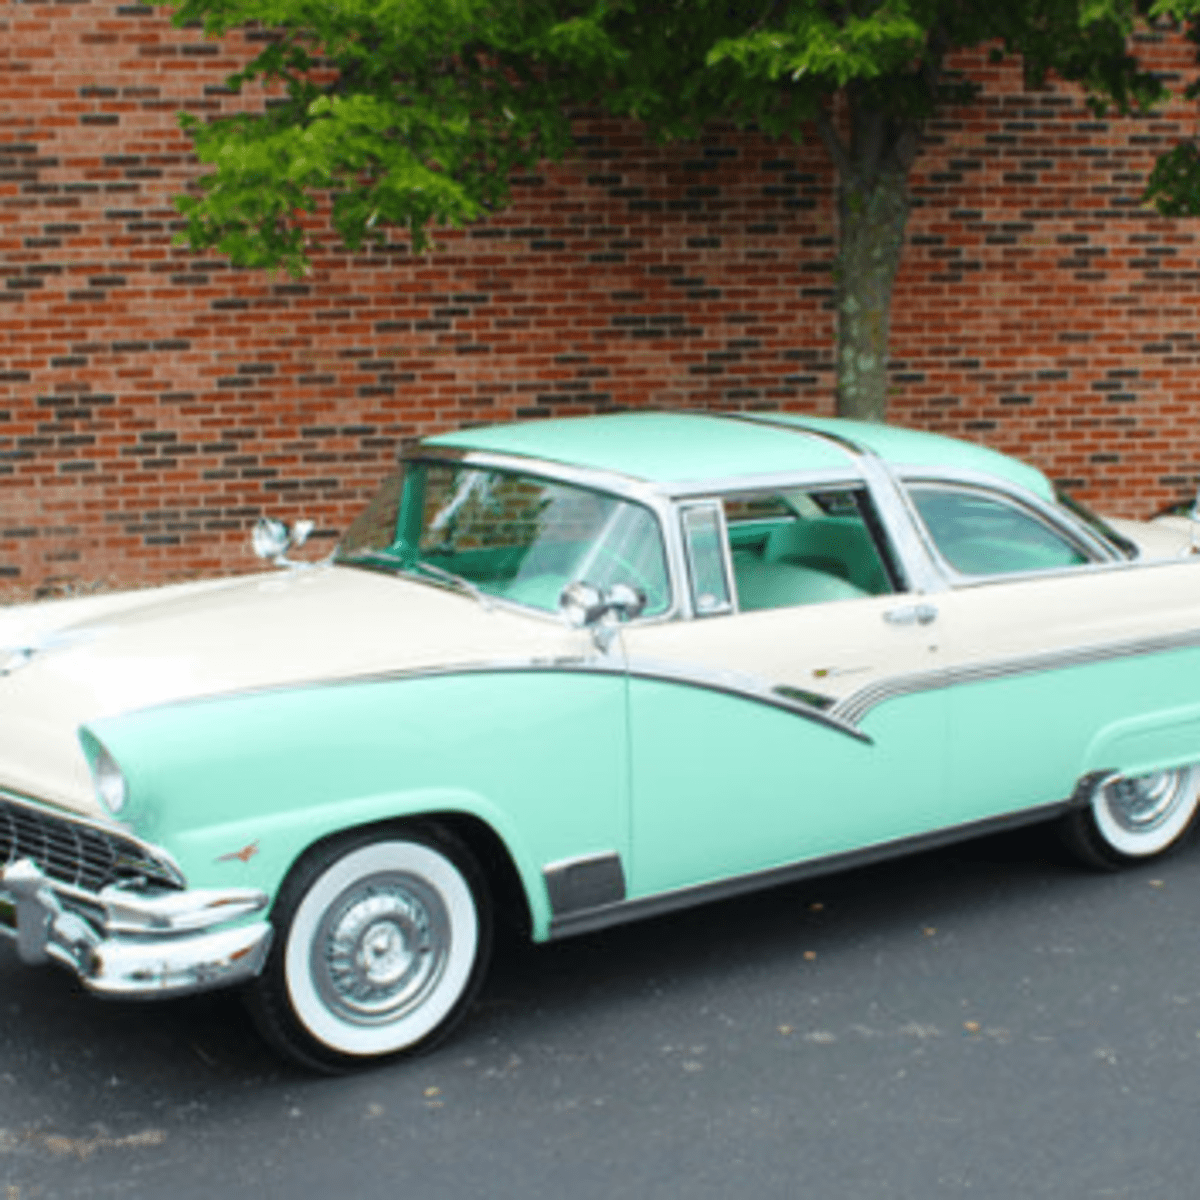 Car Of The Week 1956 Ford Fairlane Crown Victoria Old Cars Weekly